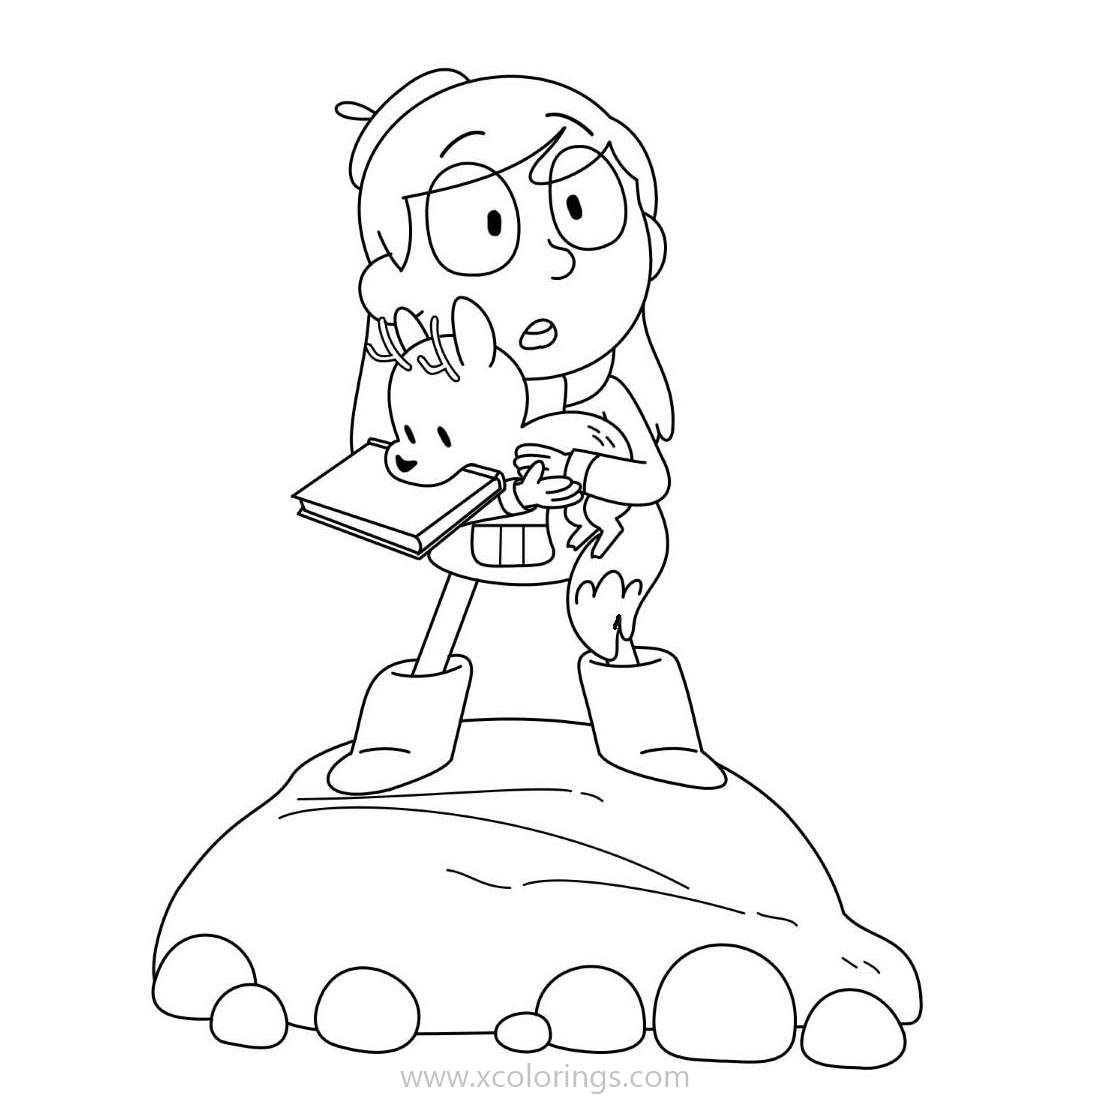 Hilda and Twig on Rock colouring image